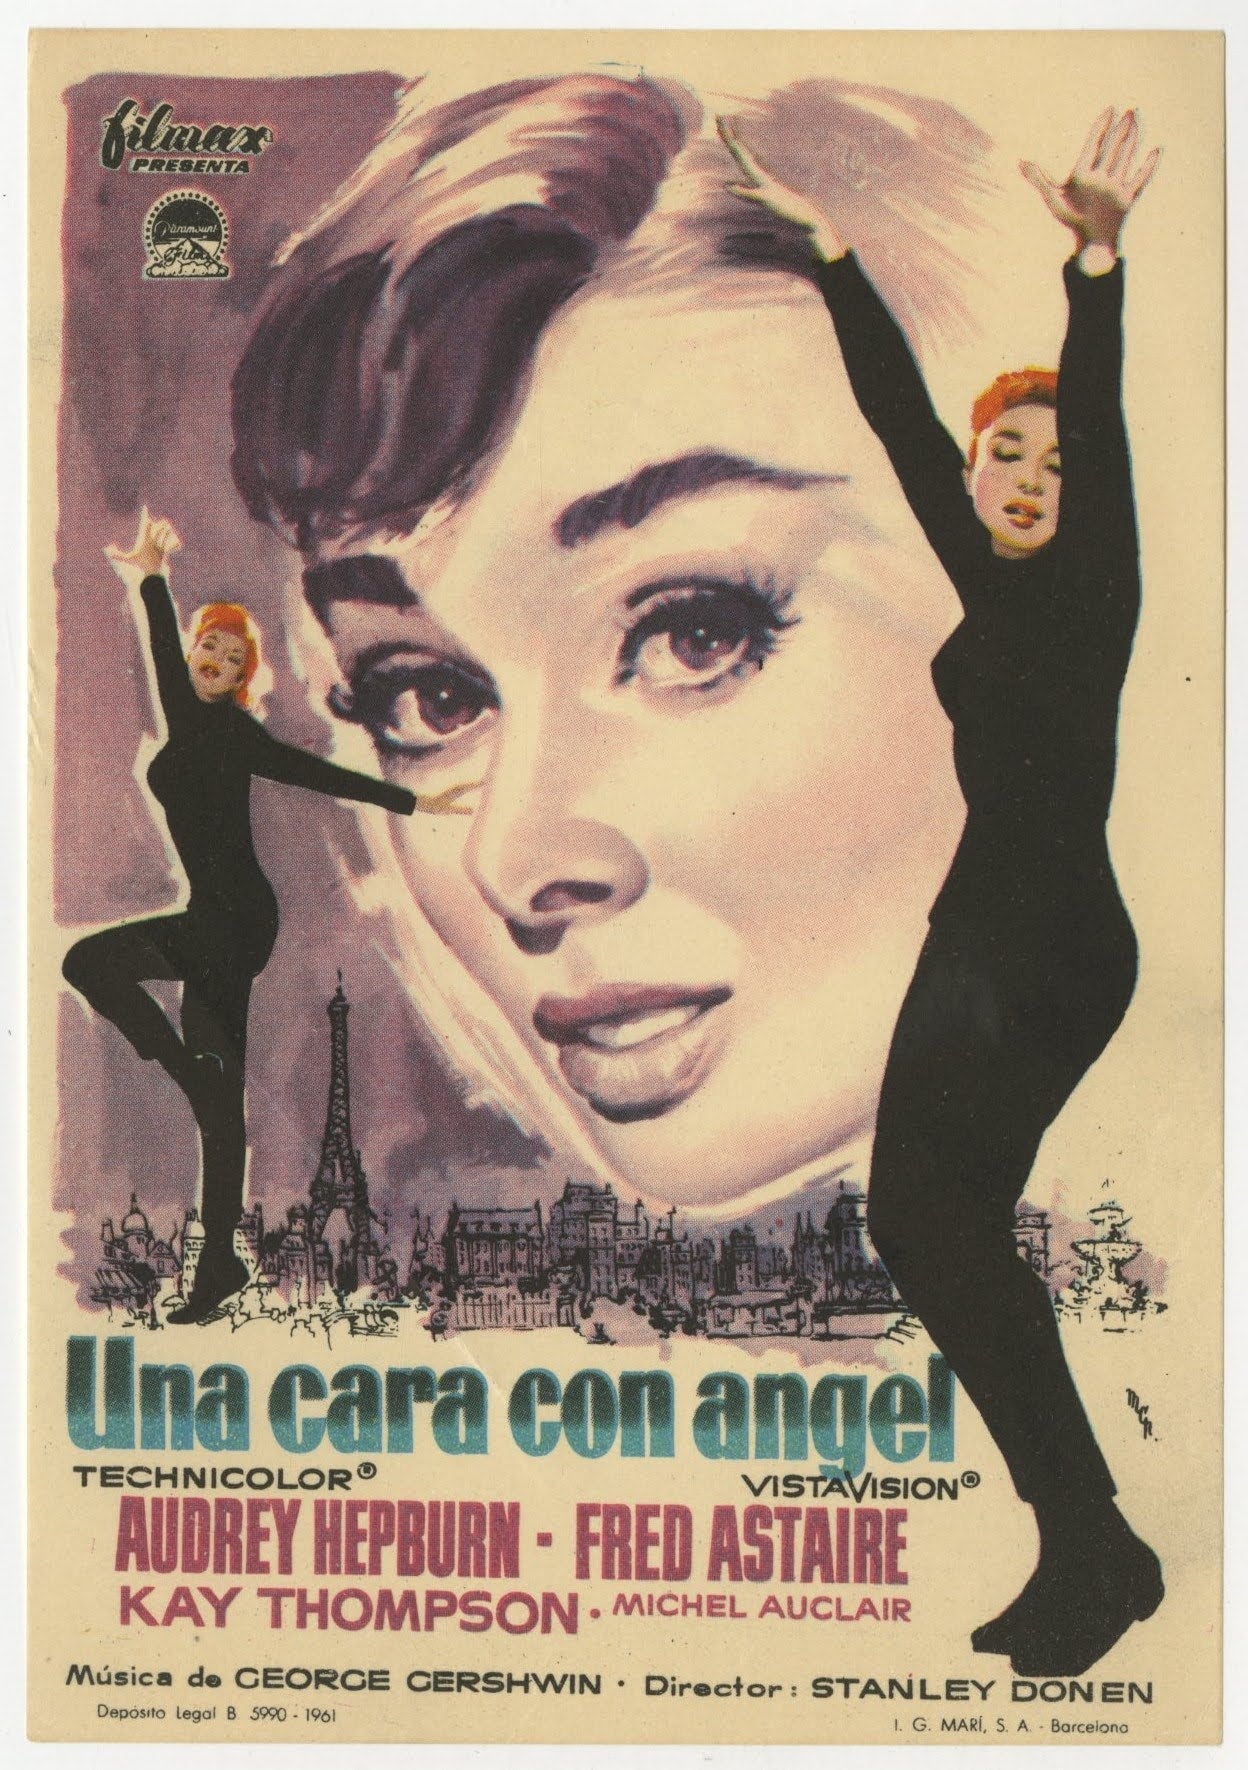 Funny Face Spanish Herald (R 1961) - posterpalace.com